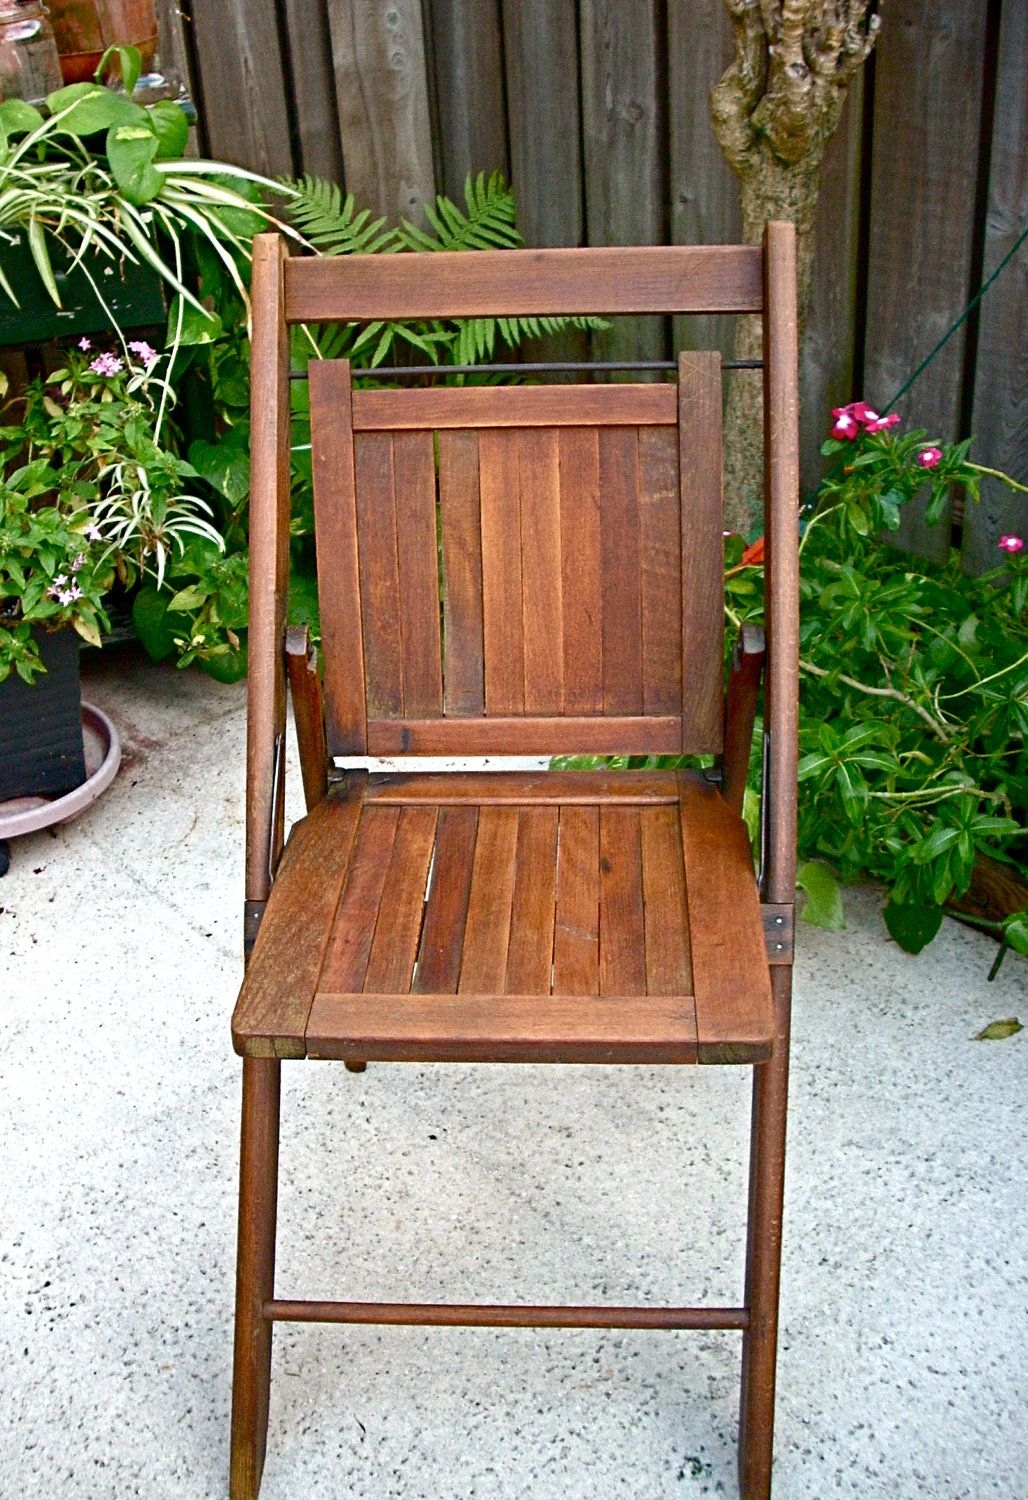 Sale 10 off vintage wooden folding chair